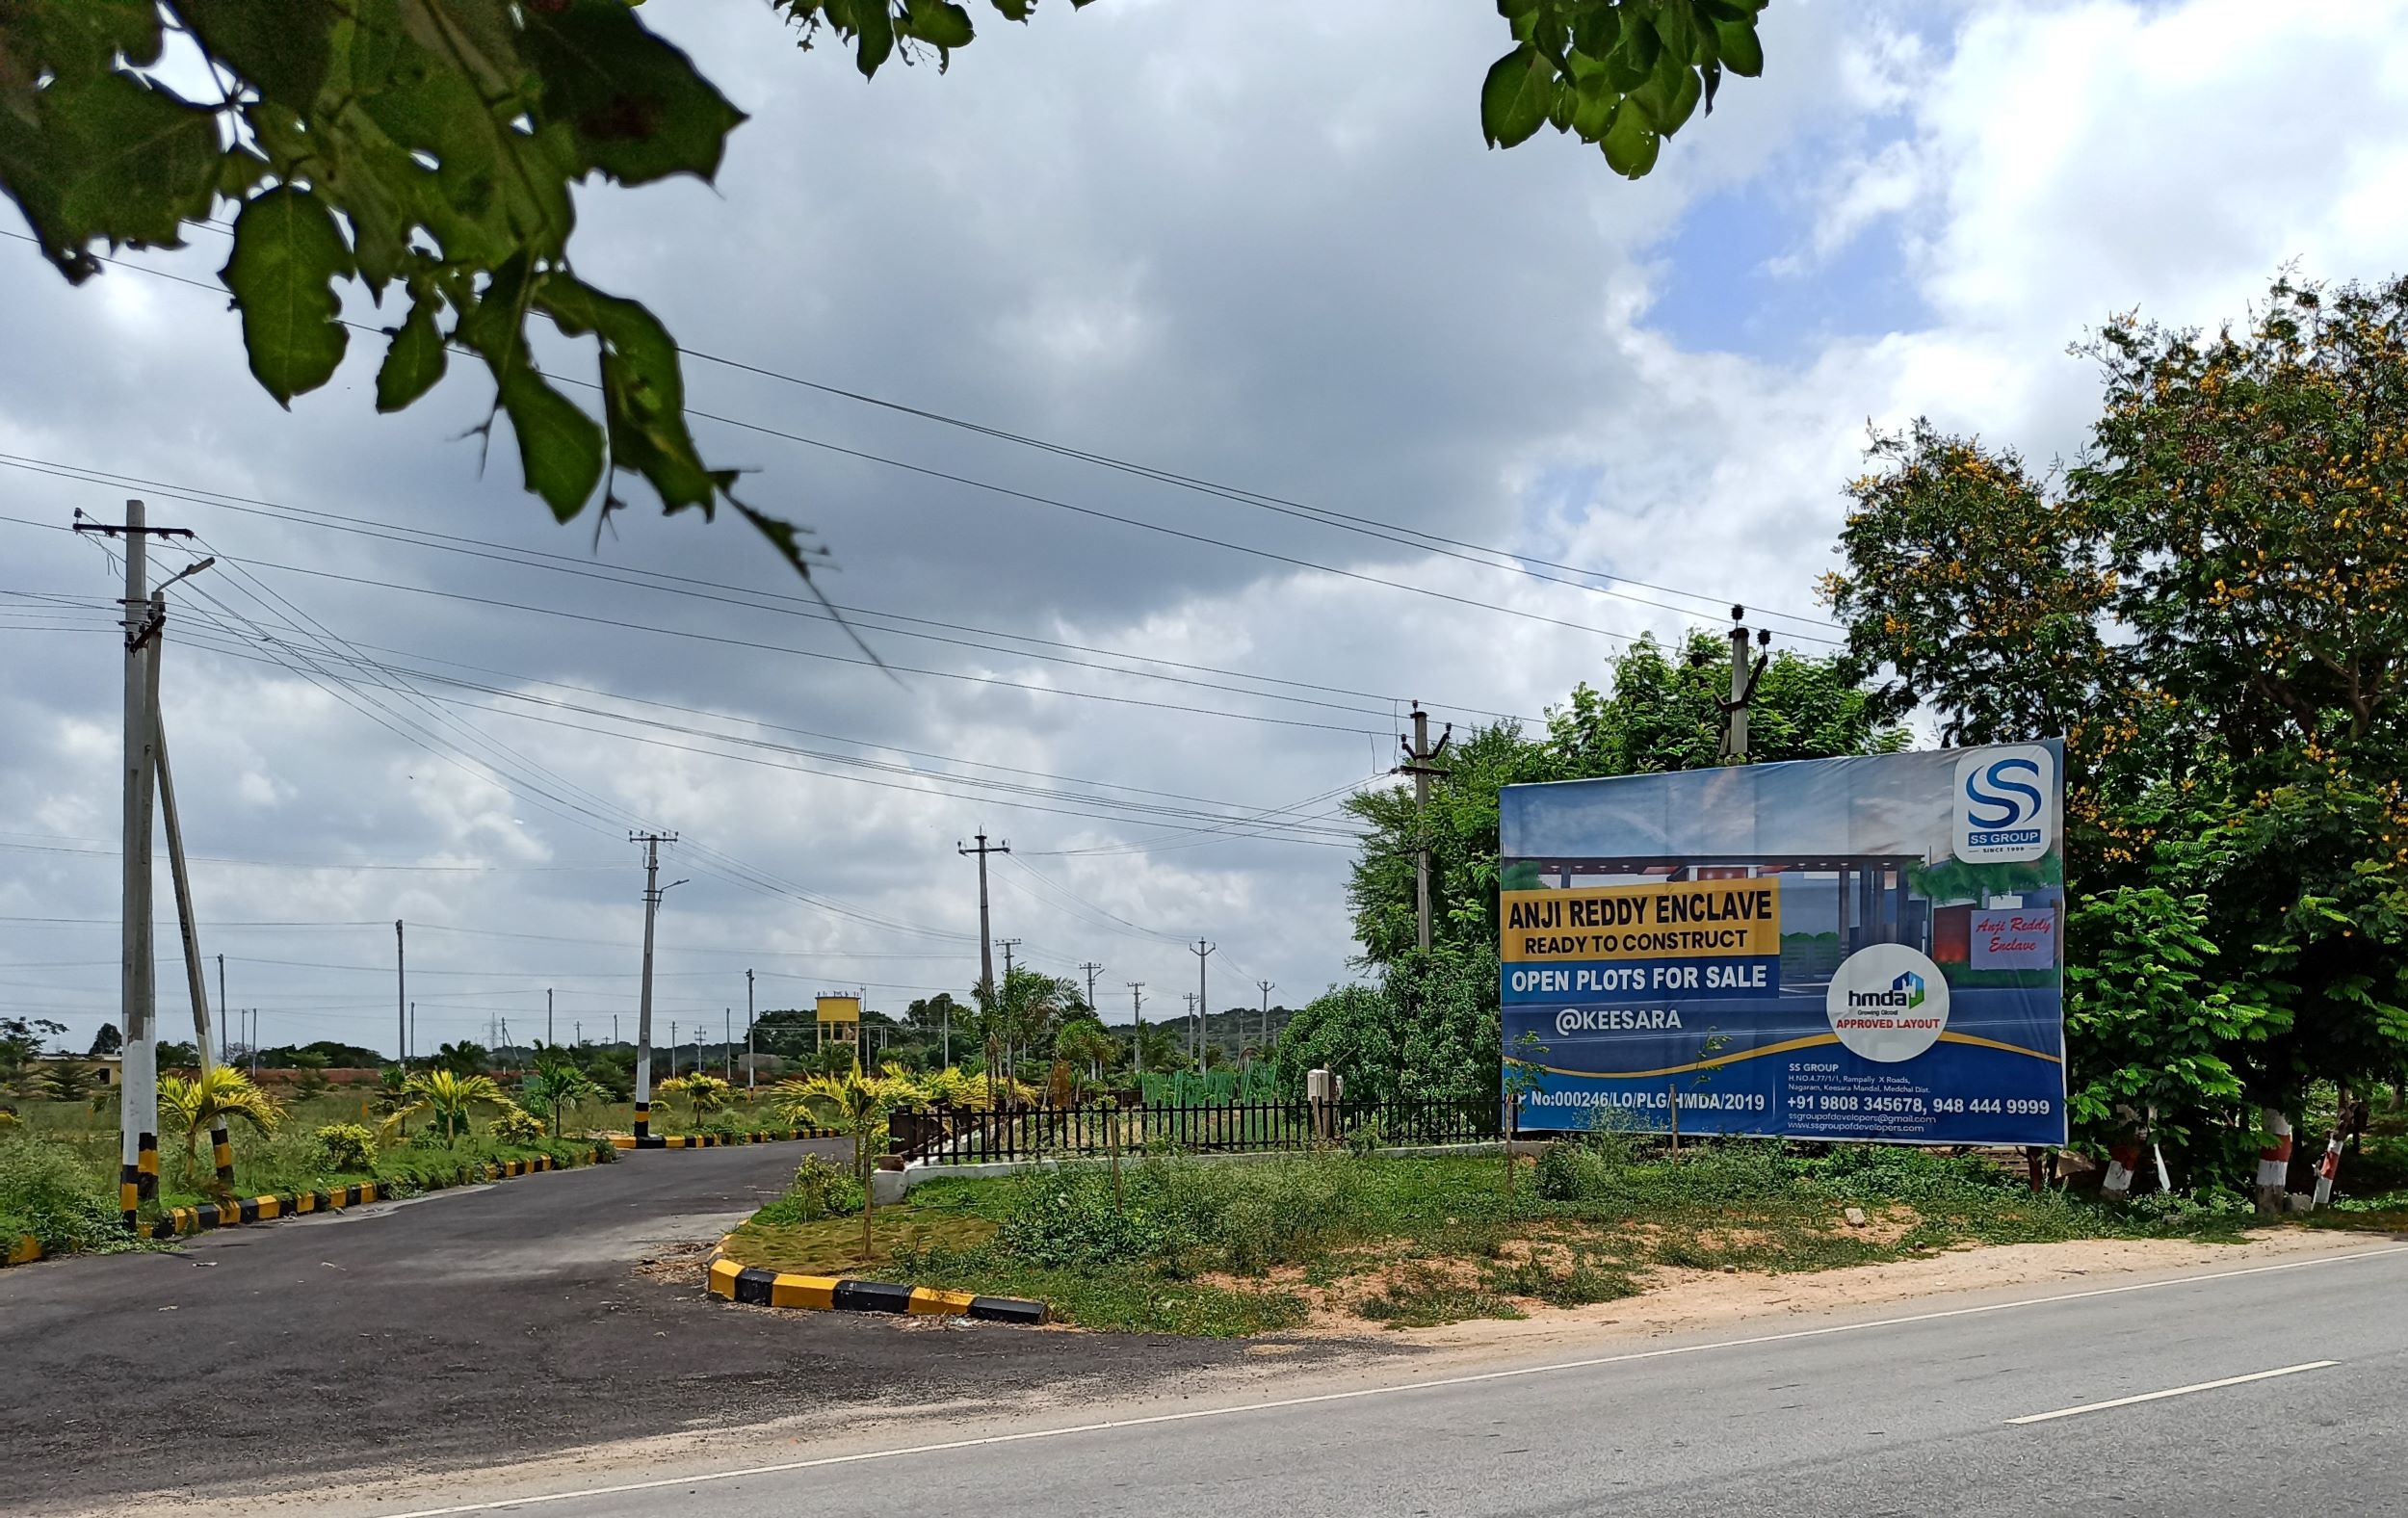 Anji-Reddy-Enclave-Entrance-wide-angle